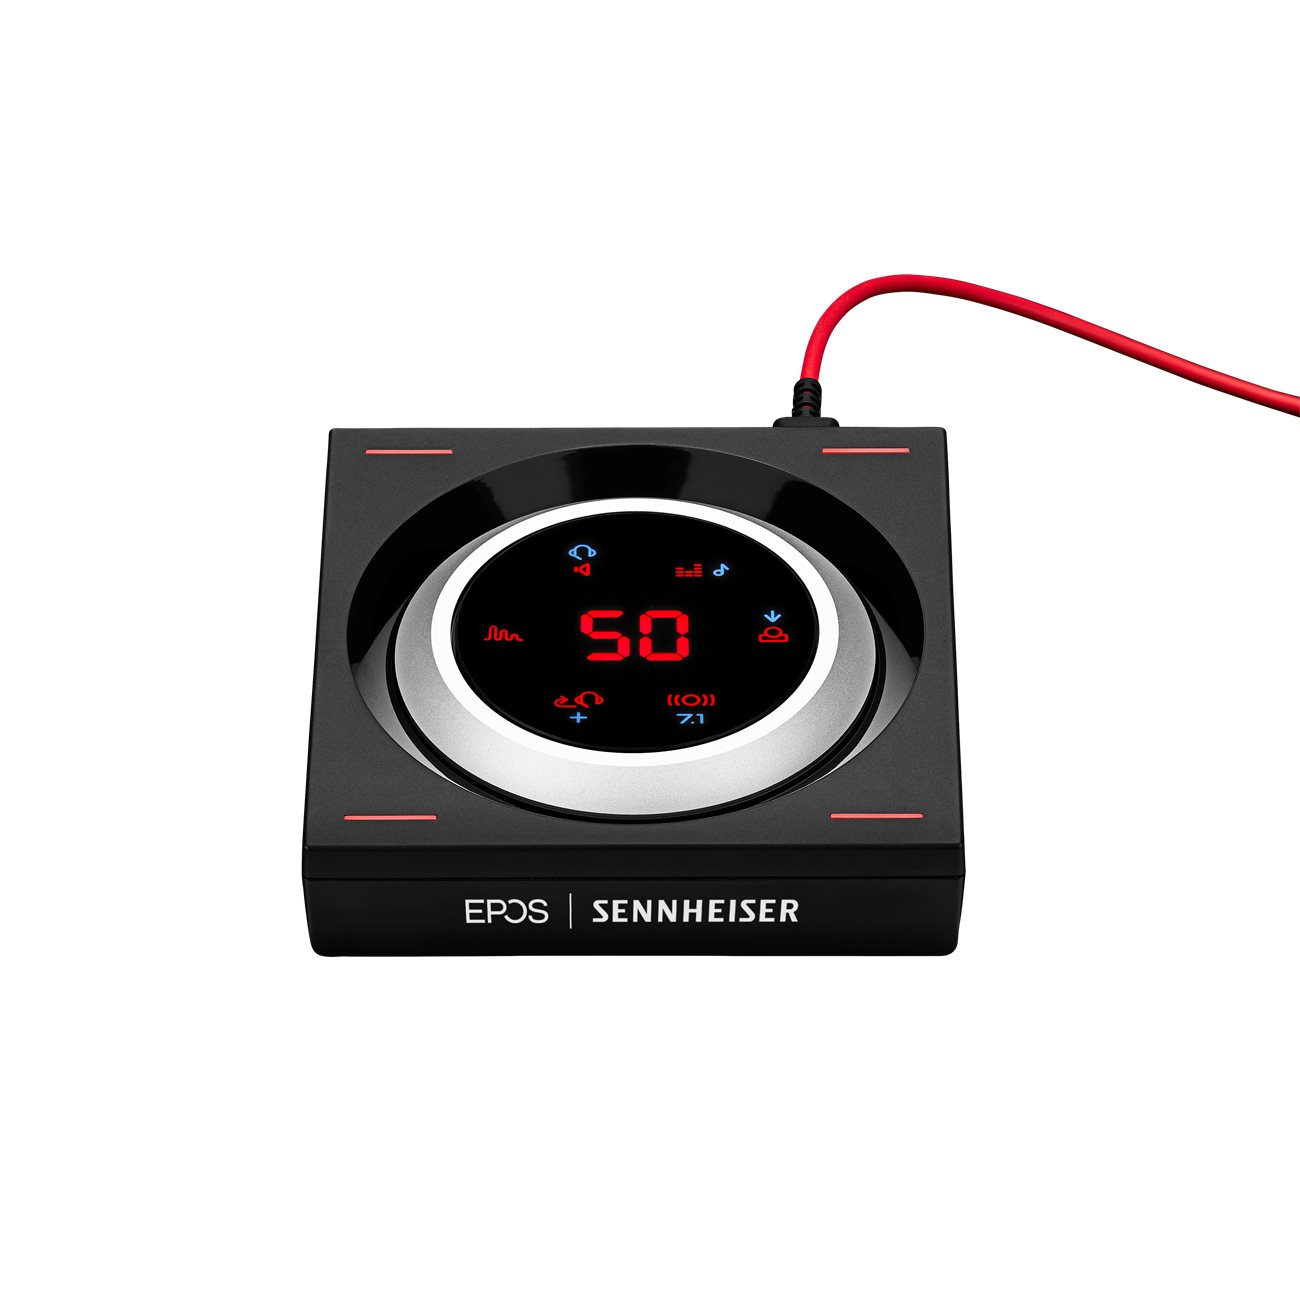 Gsx 1000 From Epos Enhanced Surround Sound Audio For Immersive Gaming